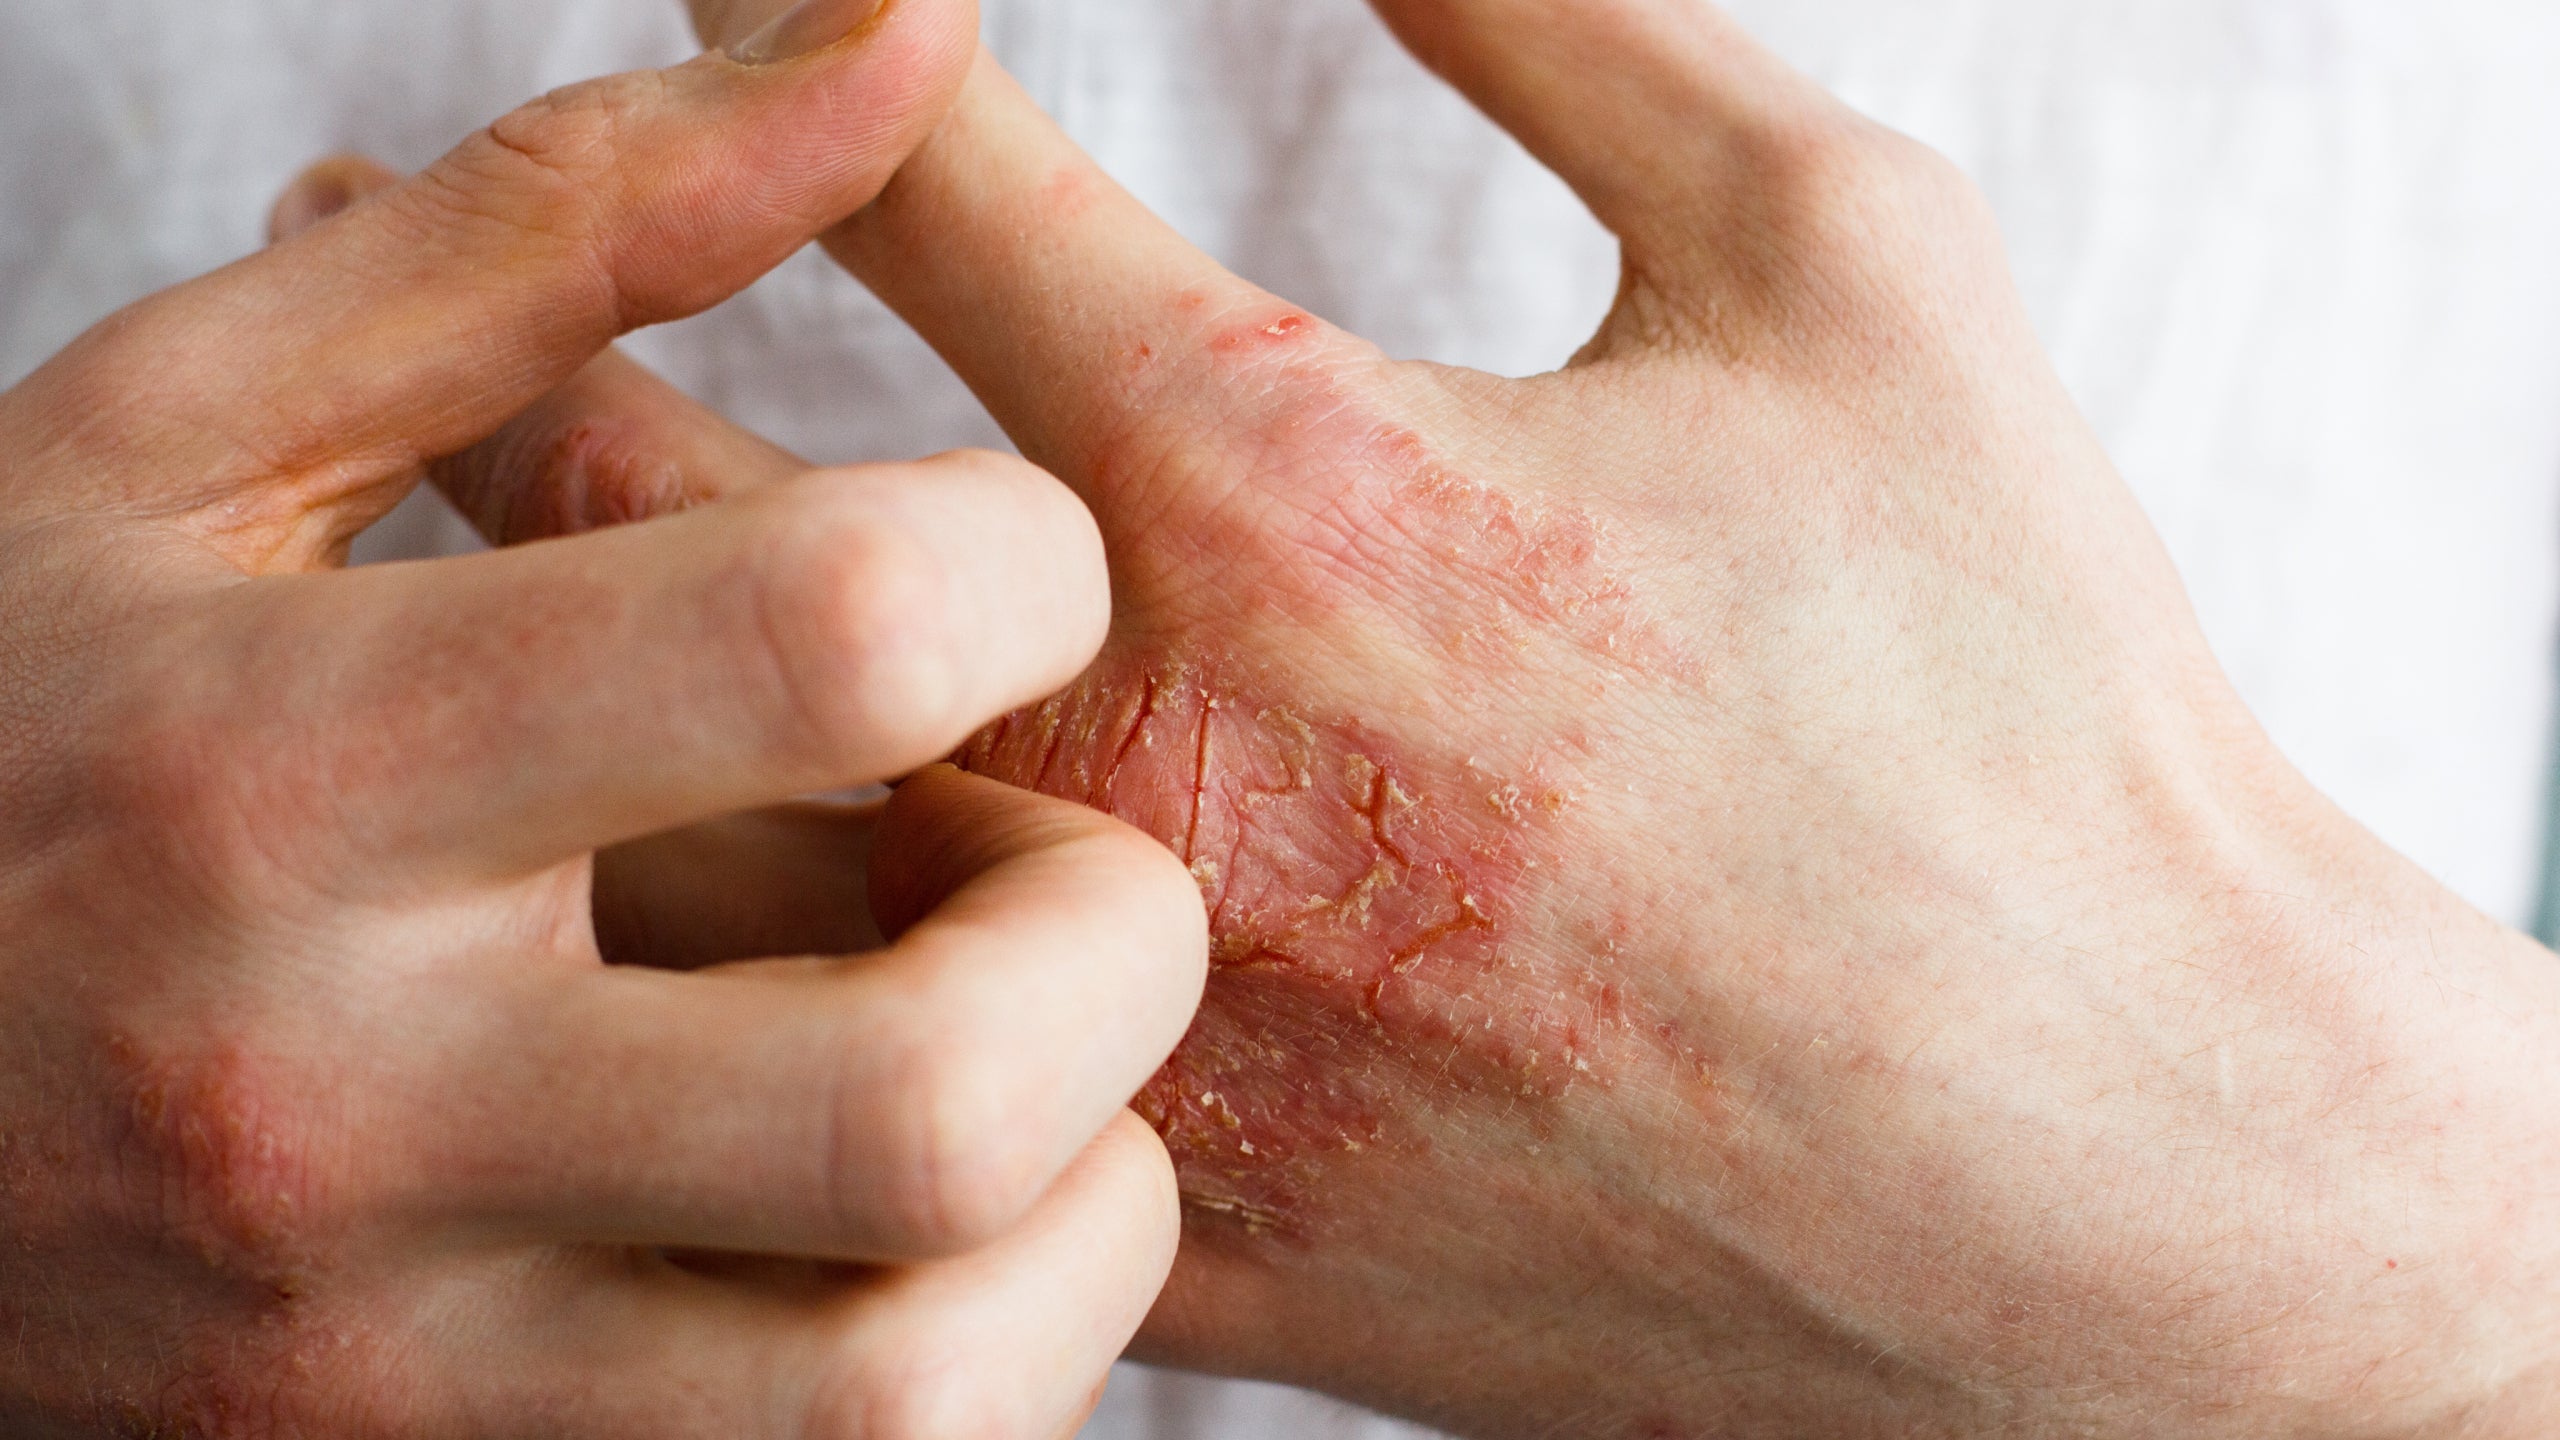 Itch 101: Why Eczema Is Such an Itchy Condition - Gladskin